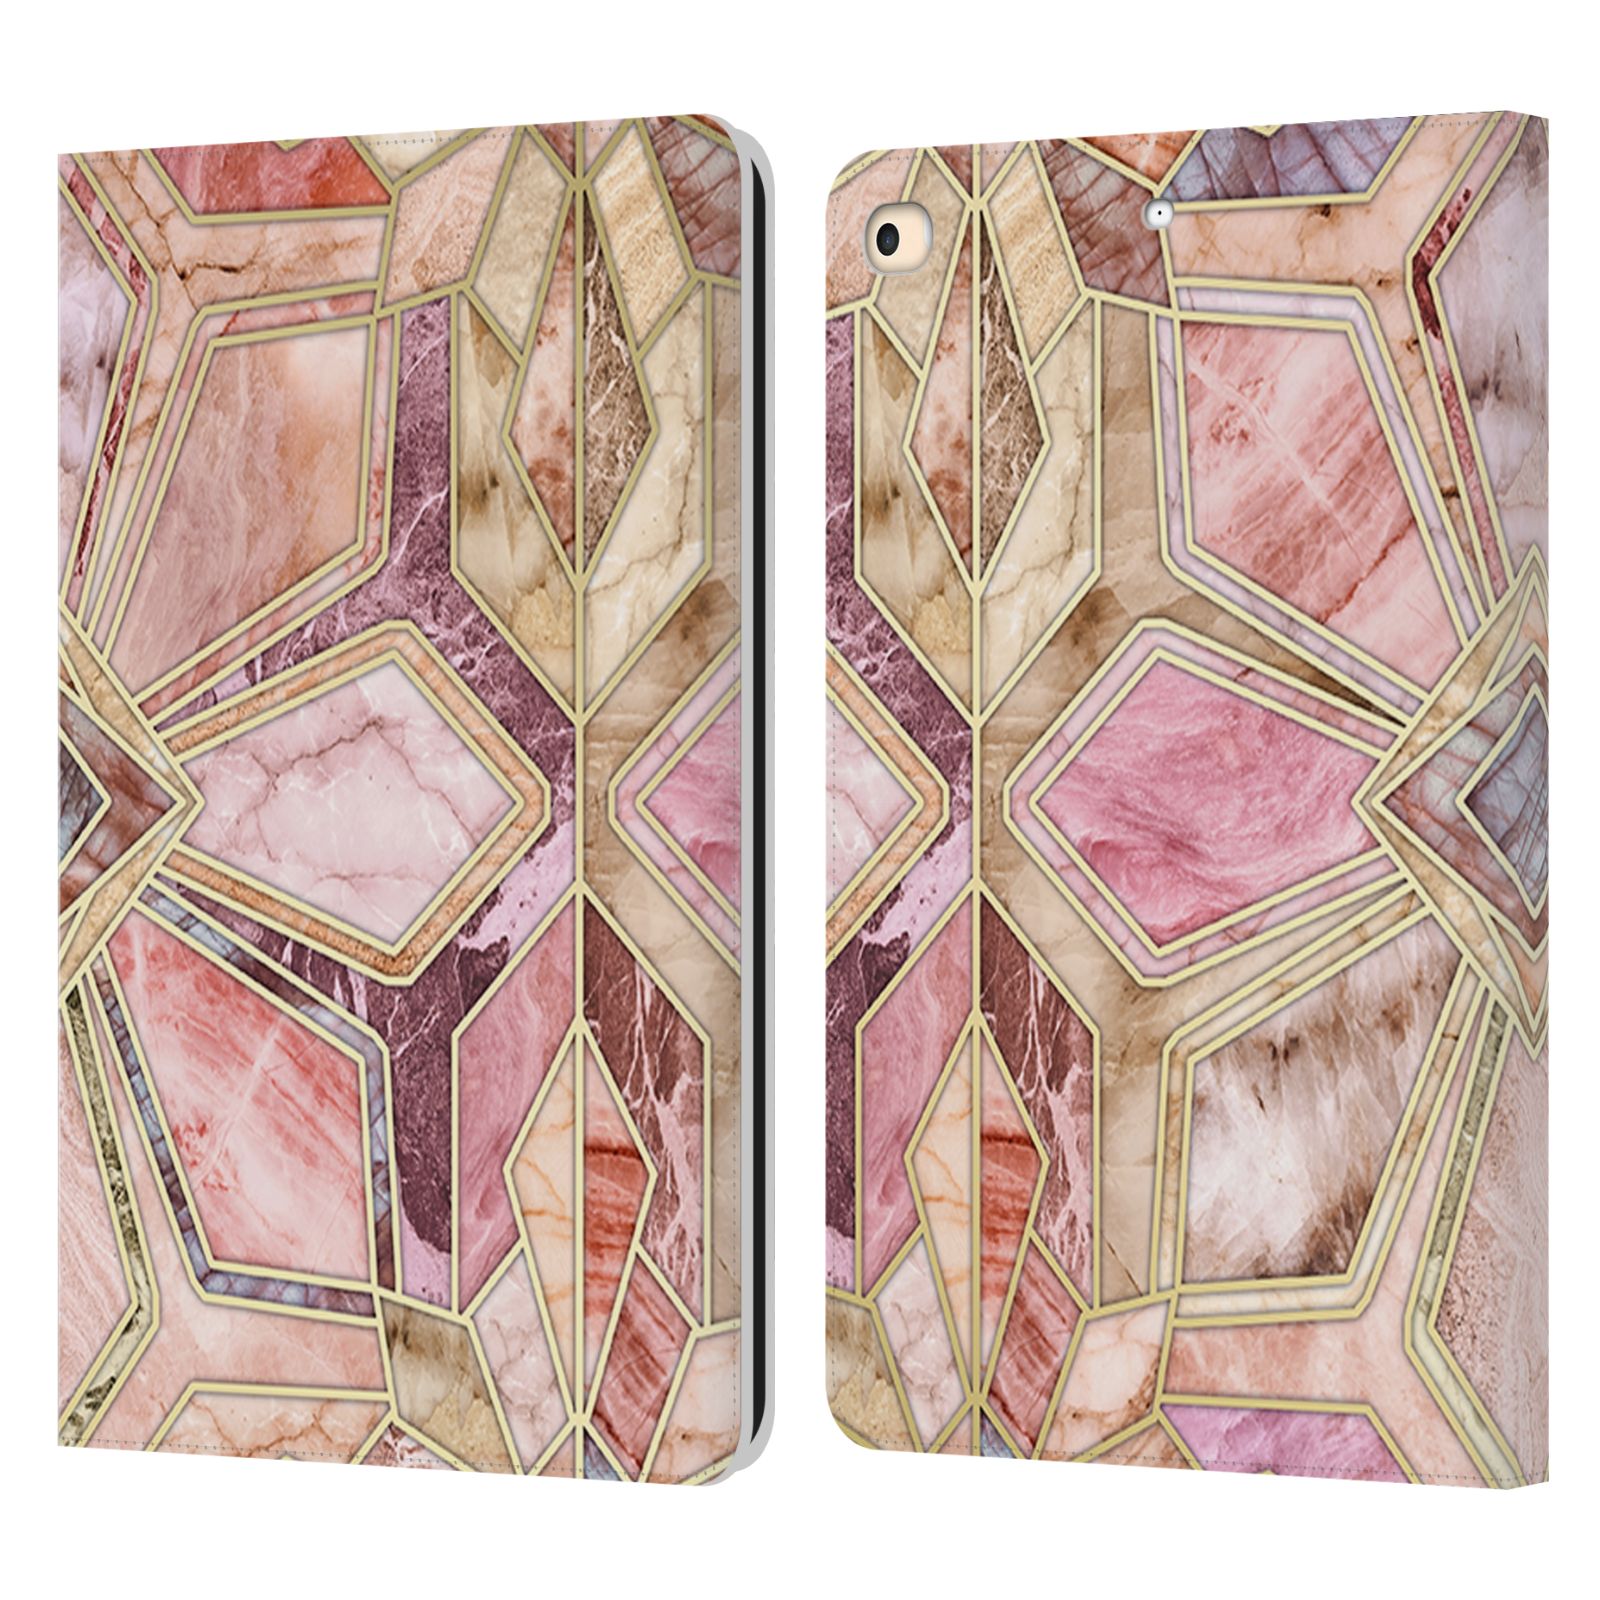 Head Case Designs Officially Licensed Micklyn Le Feuvre Marble Patterns Gilded Stone Tiles Leather Book Wallet Case Compatible with Apple iPad 9.7 2017 / iPad 9.7 2018 - image 1 of 6